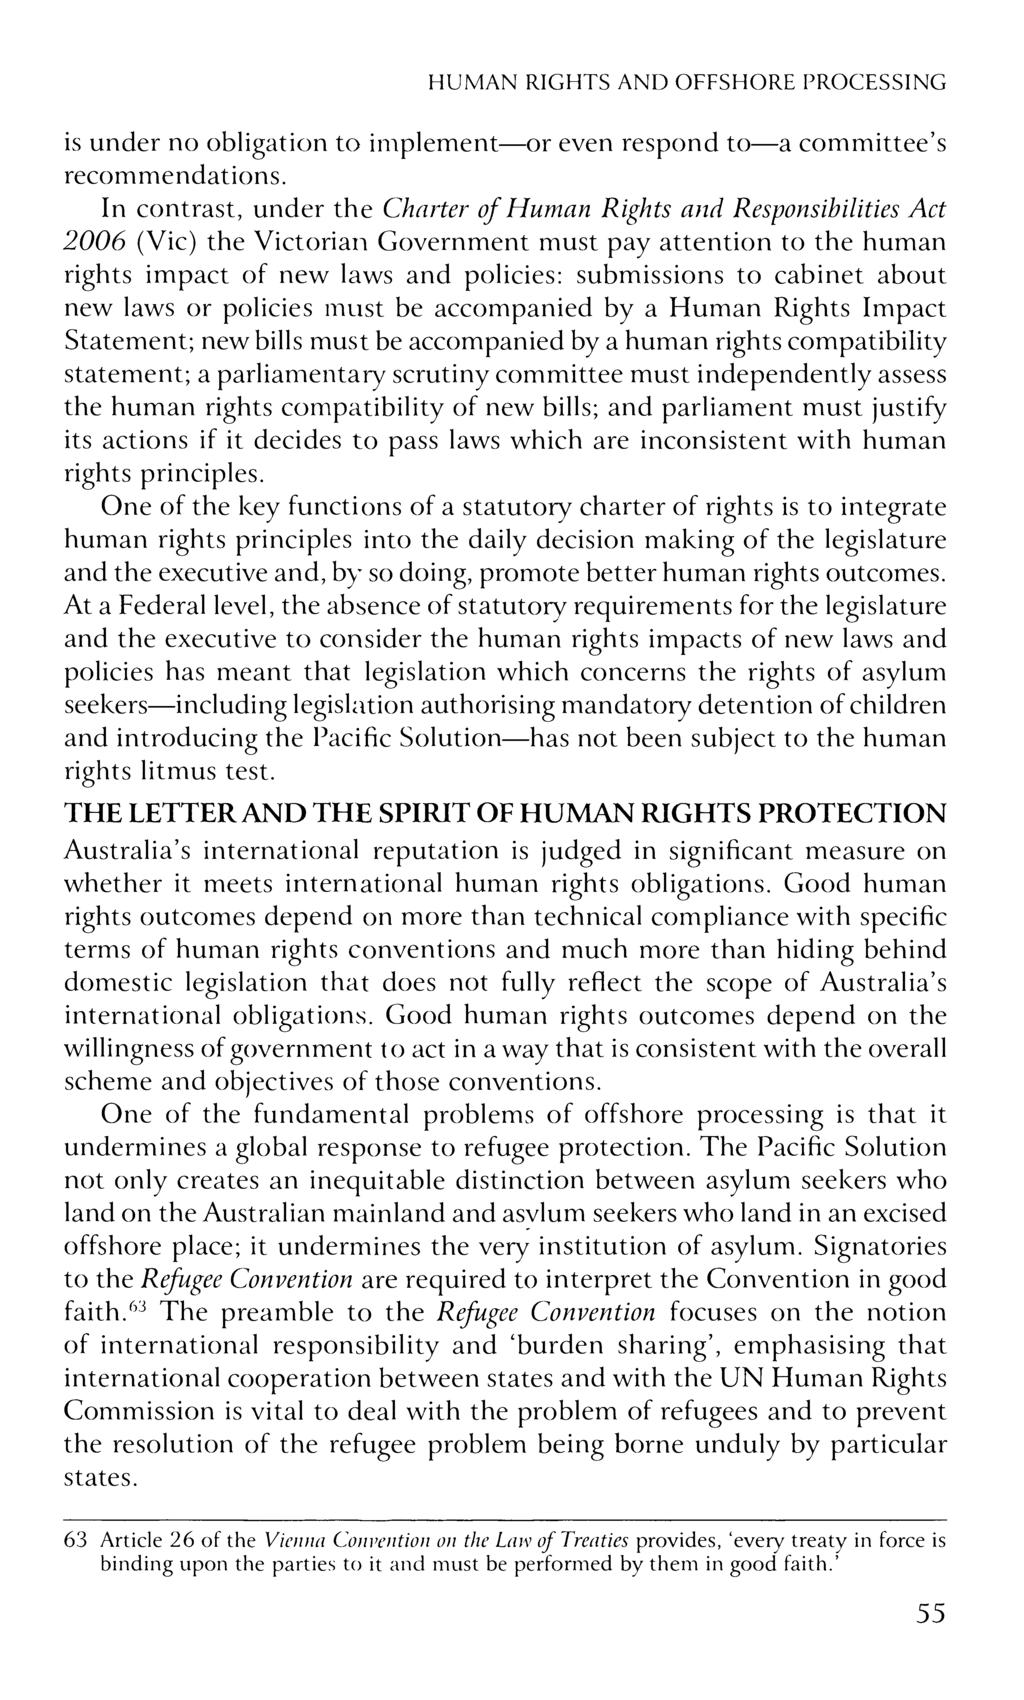 HUMAN RIGHTS AND OFFSHORE PROCESSING is under no obligation to implement or even respond to a committee s recommendations.